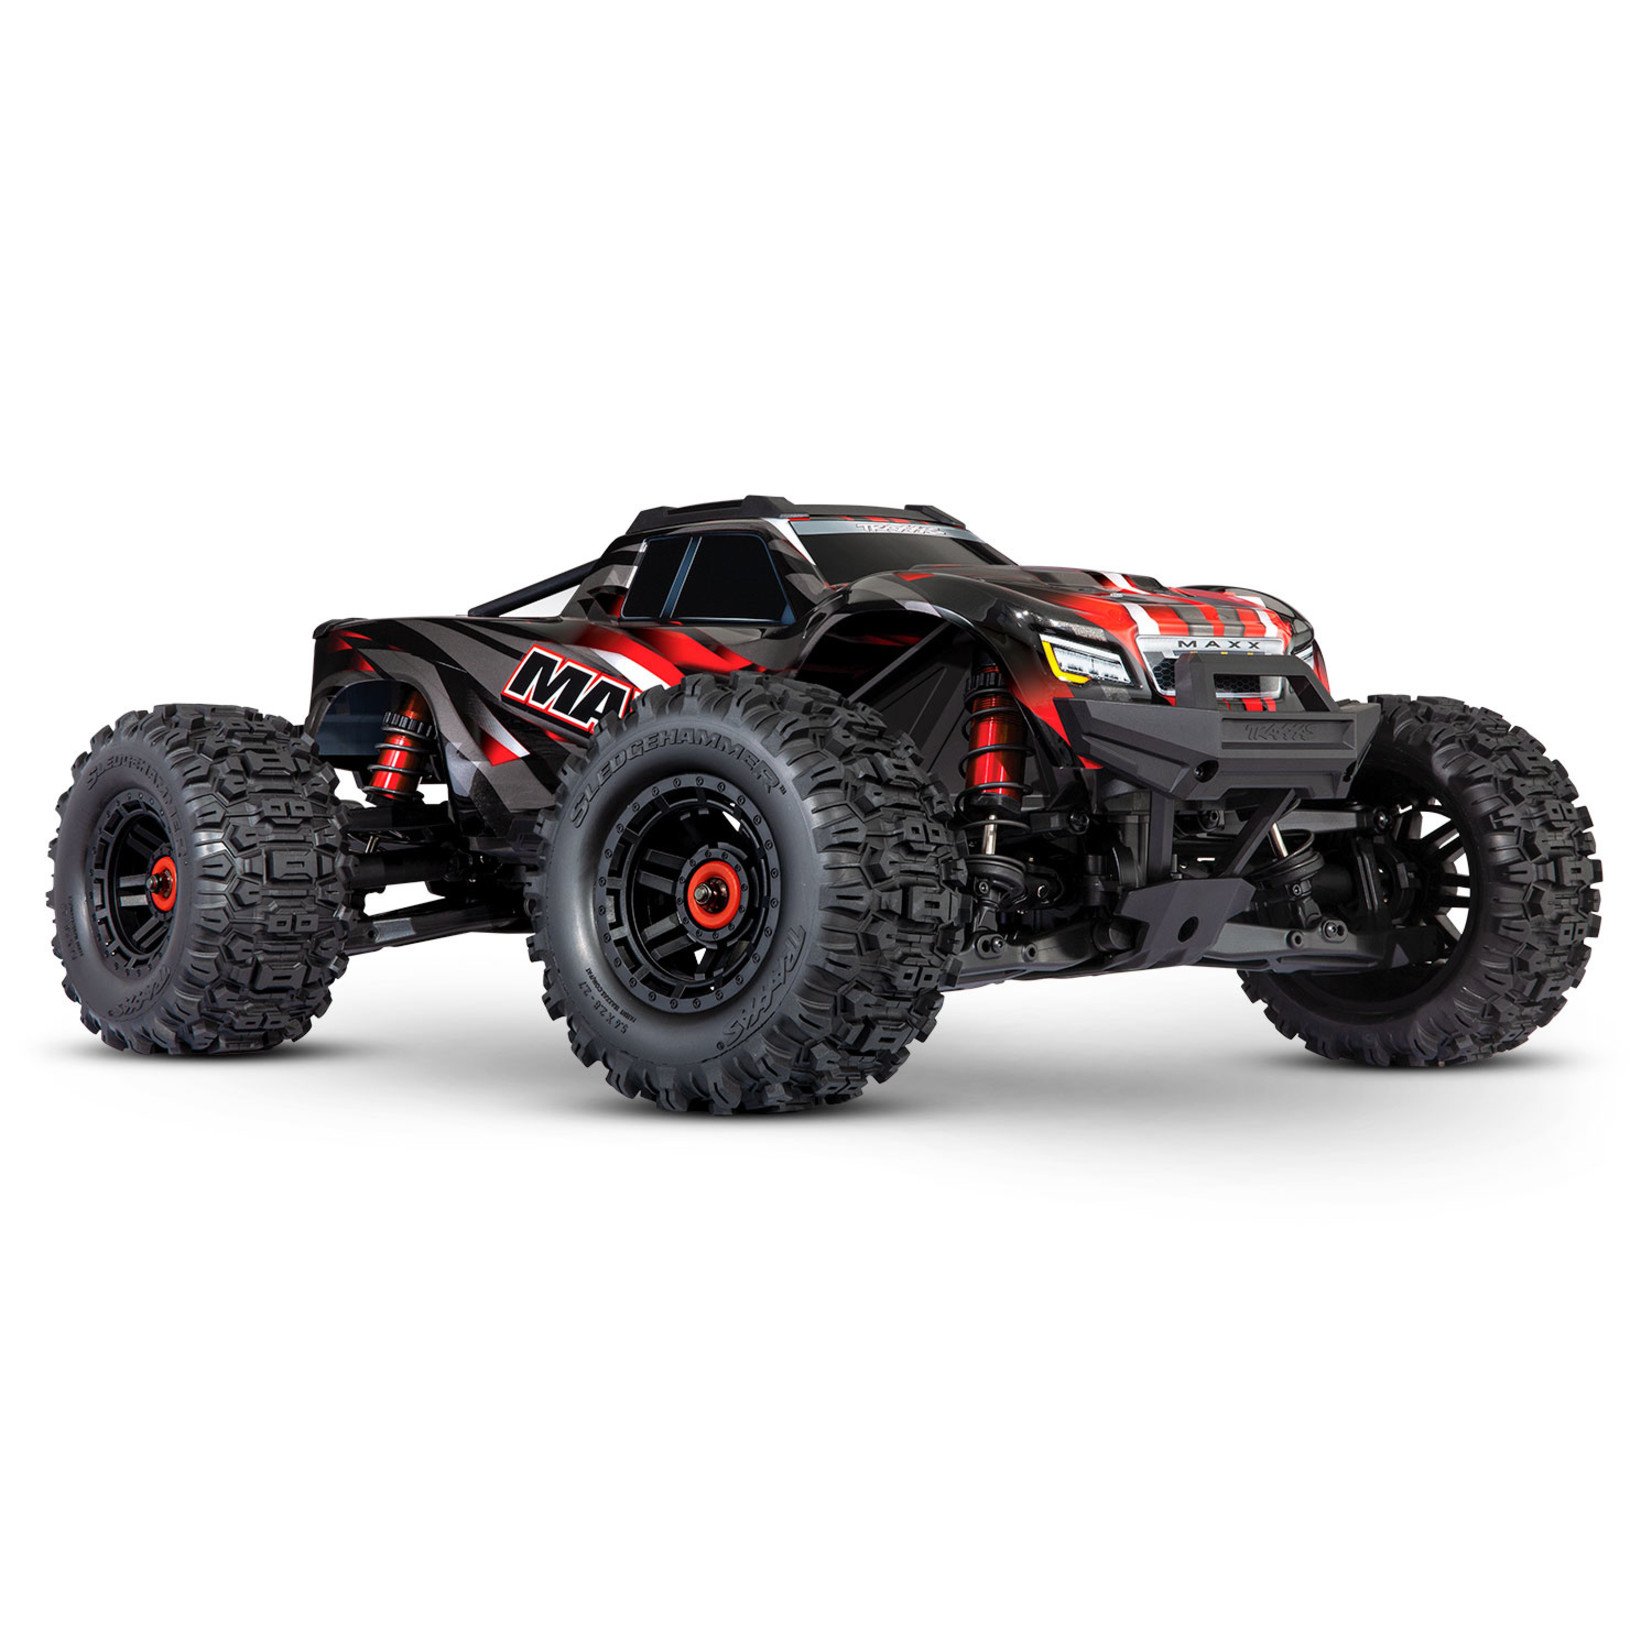 Traxxas Maxx: 1/10 Scale 4WD Brushless Electric Monster Truck with Traxxas Stability Management (TSM)